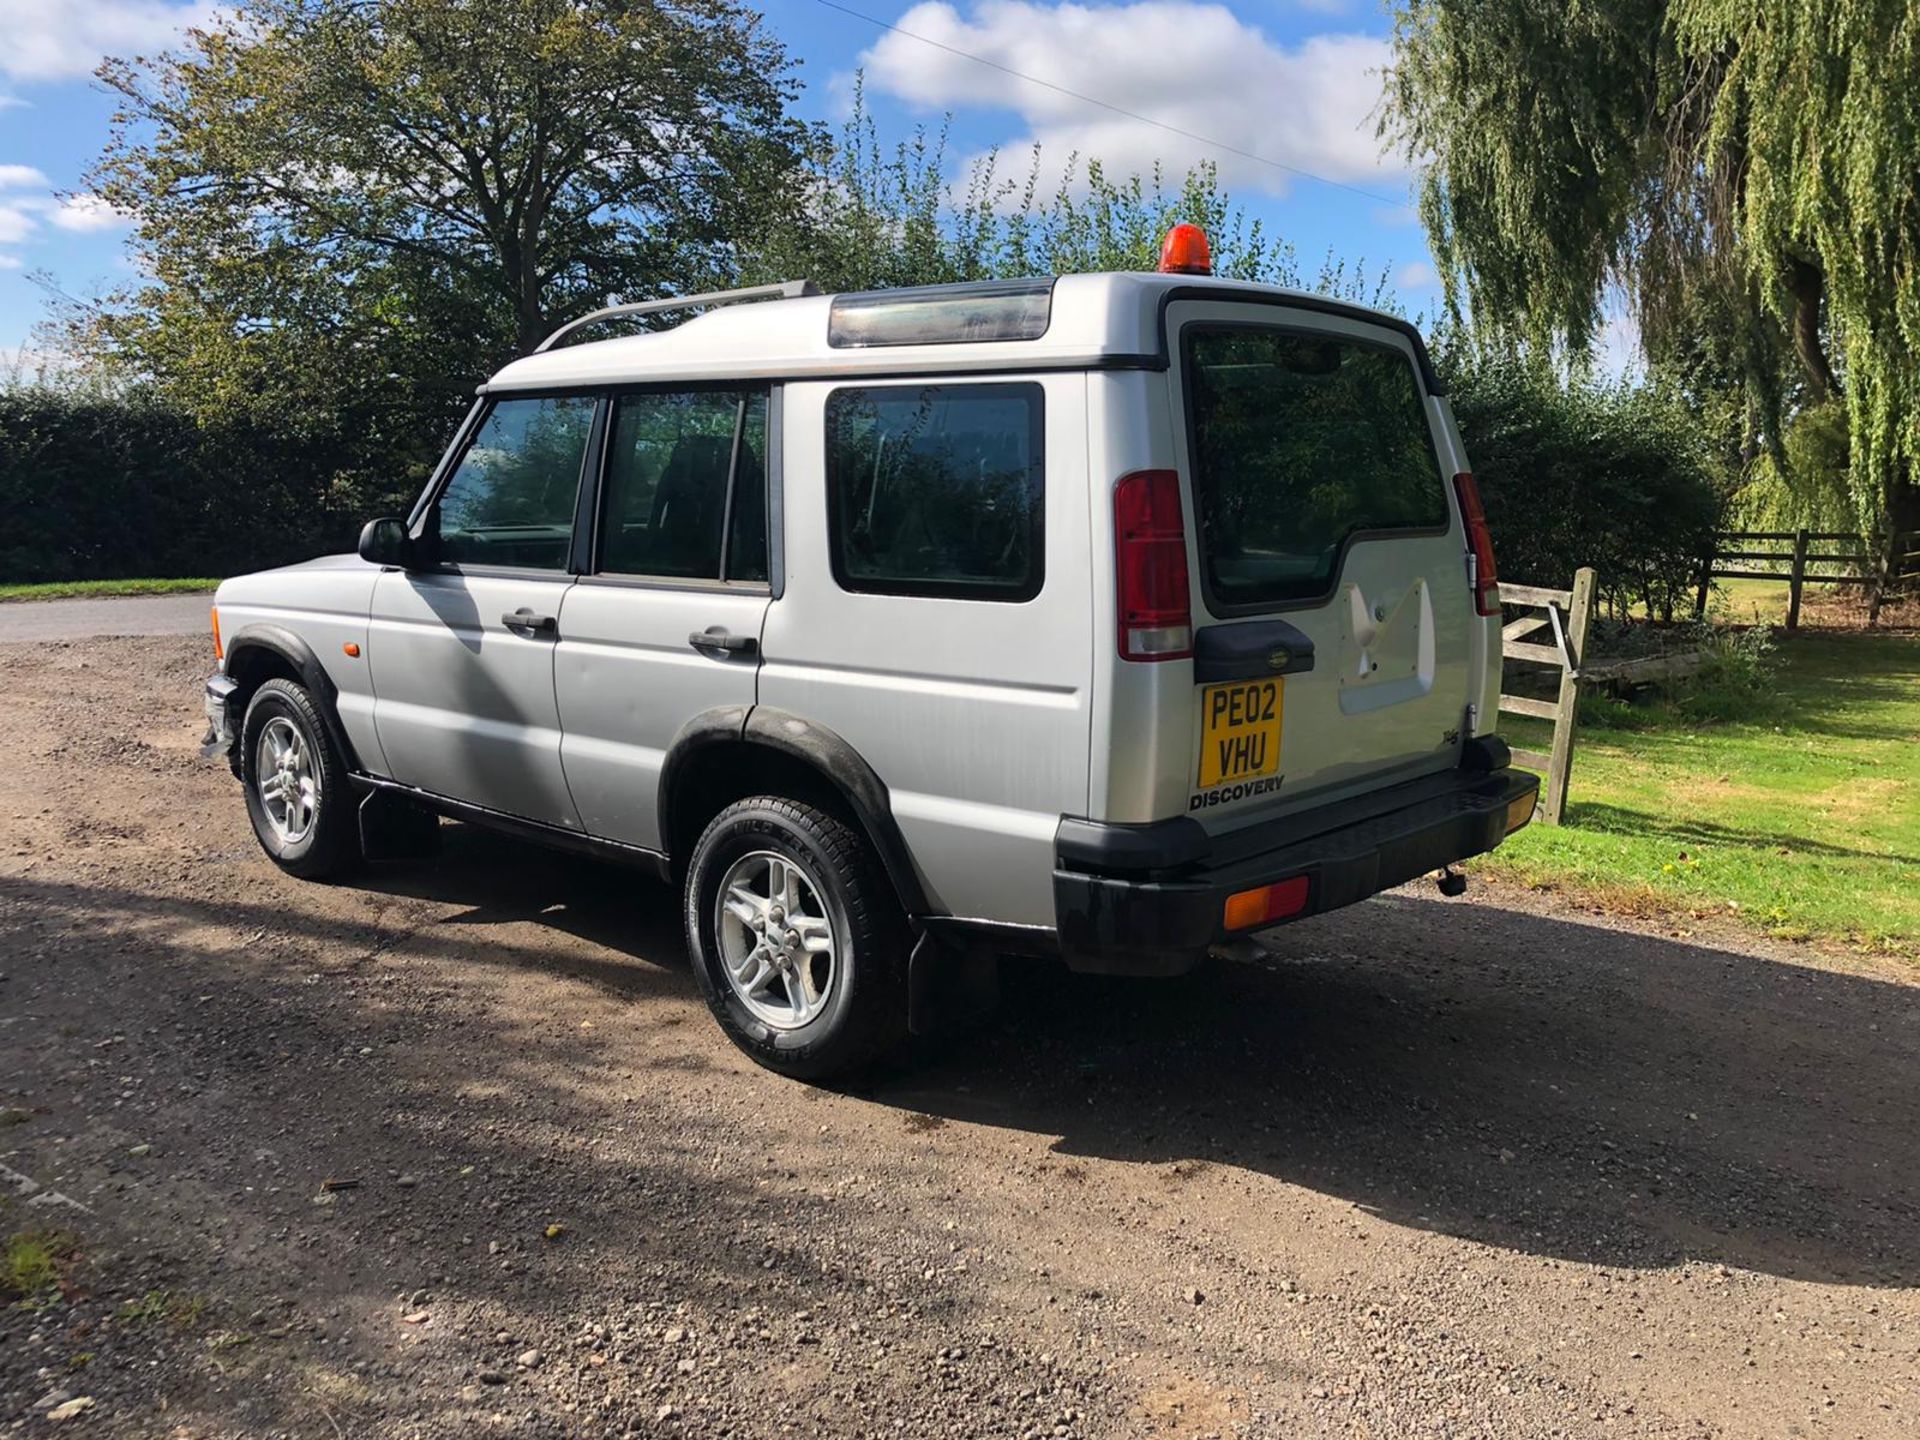 2002 LAND ROVER DISCOVERY TD5 GS SILVER ESTATE, 2.5 DIESEL ENGINE, 201,163 MILES *NO VAT* - Image 5 of 17